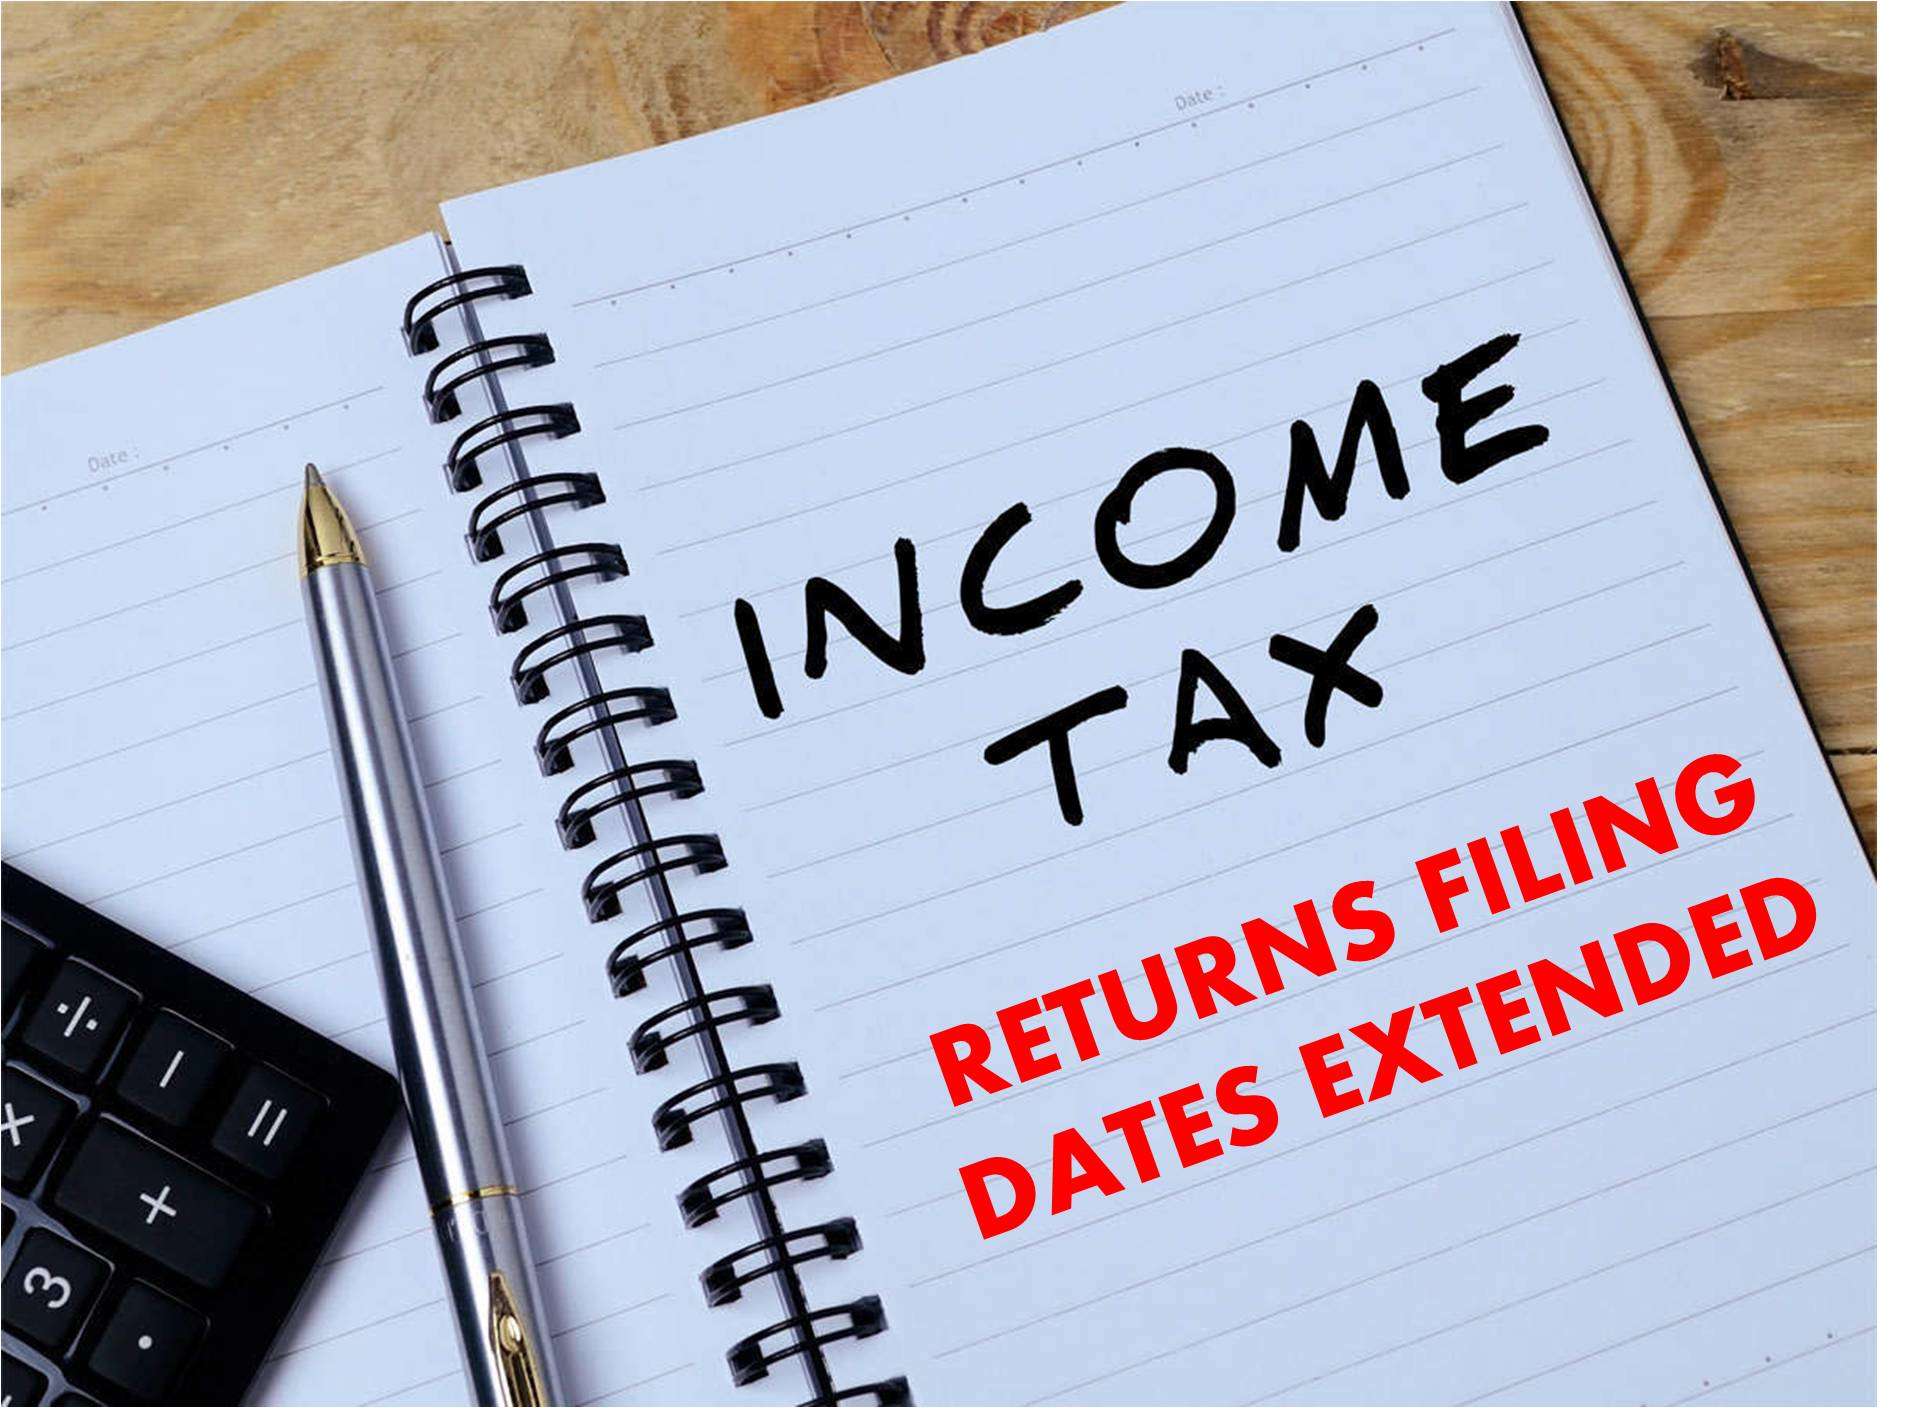 Income Tax return filing deadline extended to 10 January 2021 - other deadlines also extended